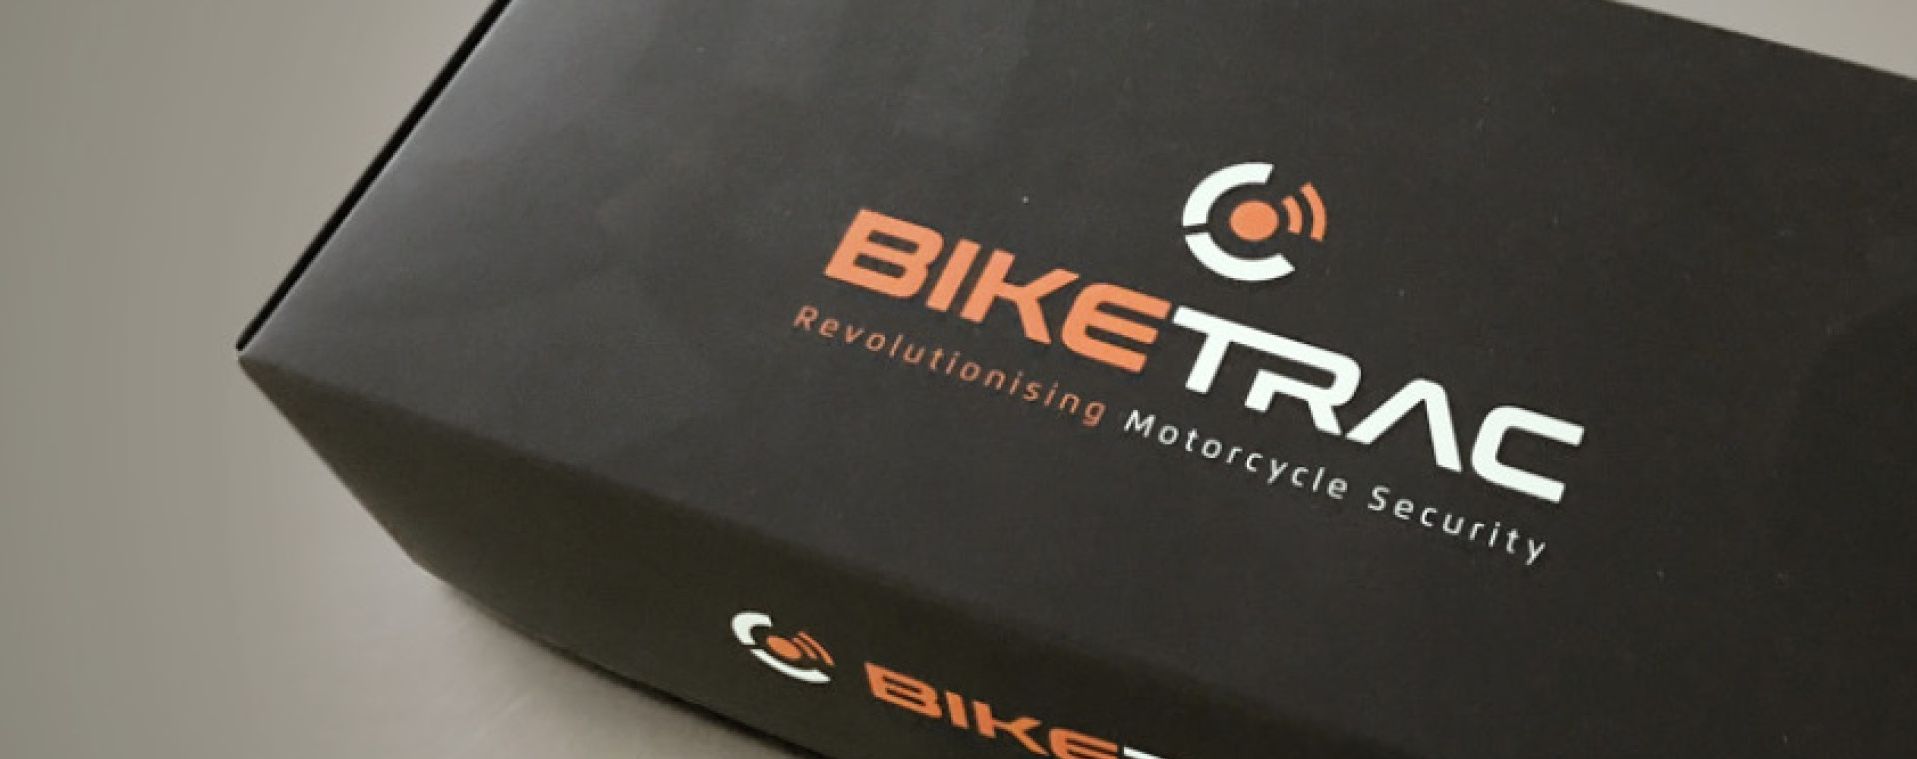 WIN A BIKETRAC TRACKING SYSTEM